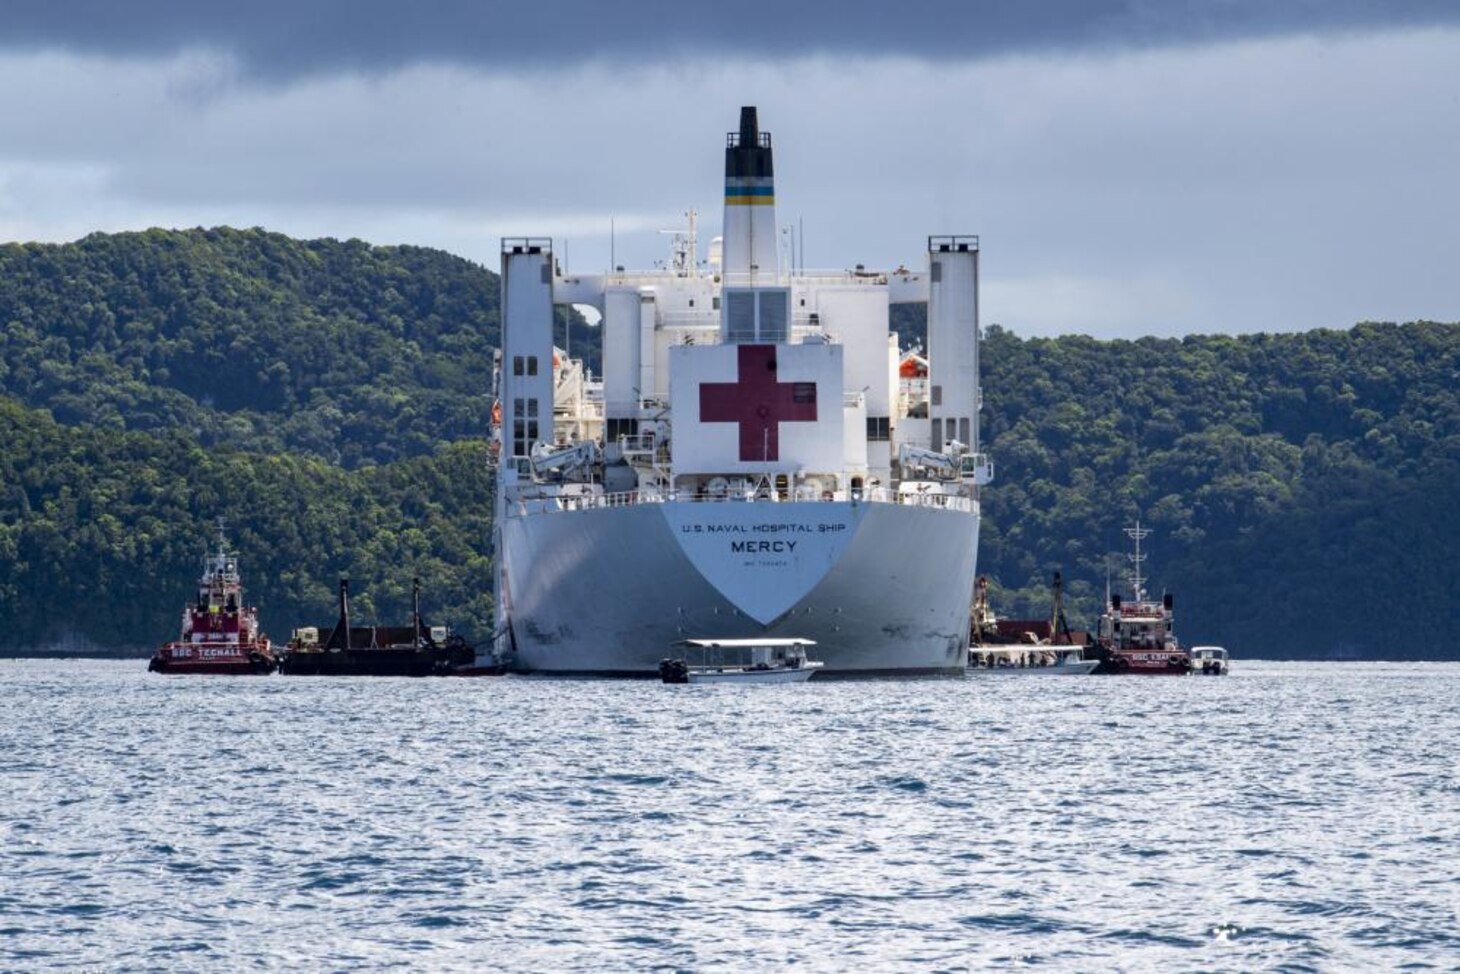 PACIFIC OCEAN (July 18, 2022) – Military Sealift Command hospital ship USNS Mercy (T-AH 19) sits at anchor upon its arrival off the coast of Koror, Palau during Pacific Partnership 2022. Now in its 17th year, Pacific Partnership is the largest annual multinational humanitarian assistance and disaster relief preparedness mission conducted in the Indo-Pacific. (U.S. Navy photo by Mass Communication Specialist 2nd Class Brandie Nuzzi)